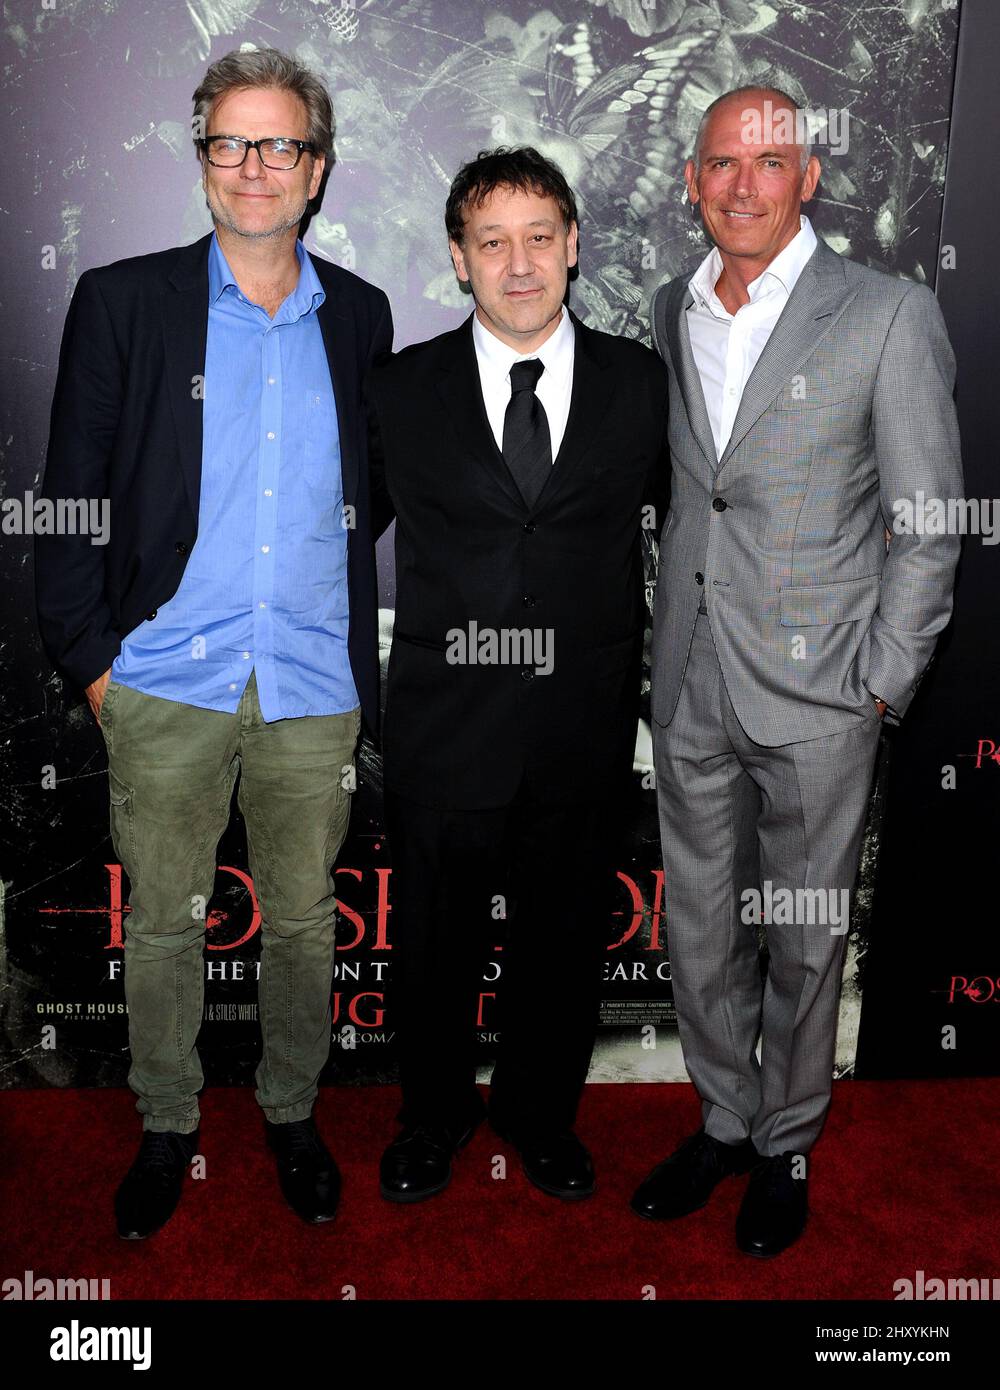 Sam Raimi attends 'The Possession' Los Angeles Premiere held at the ArcLight Theatre. Stock Photo